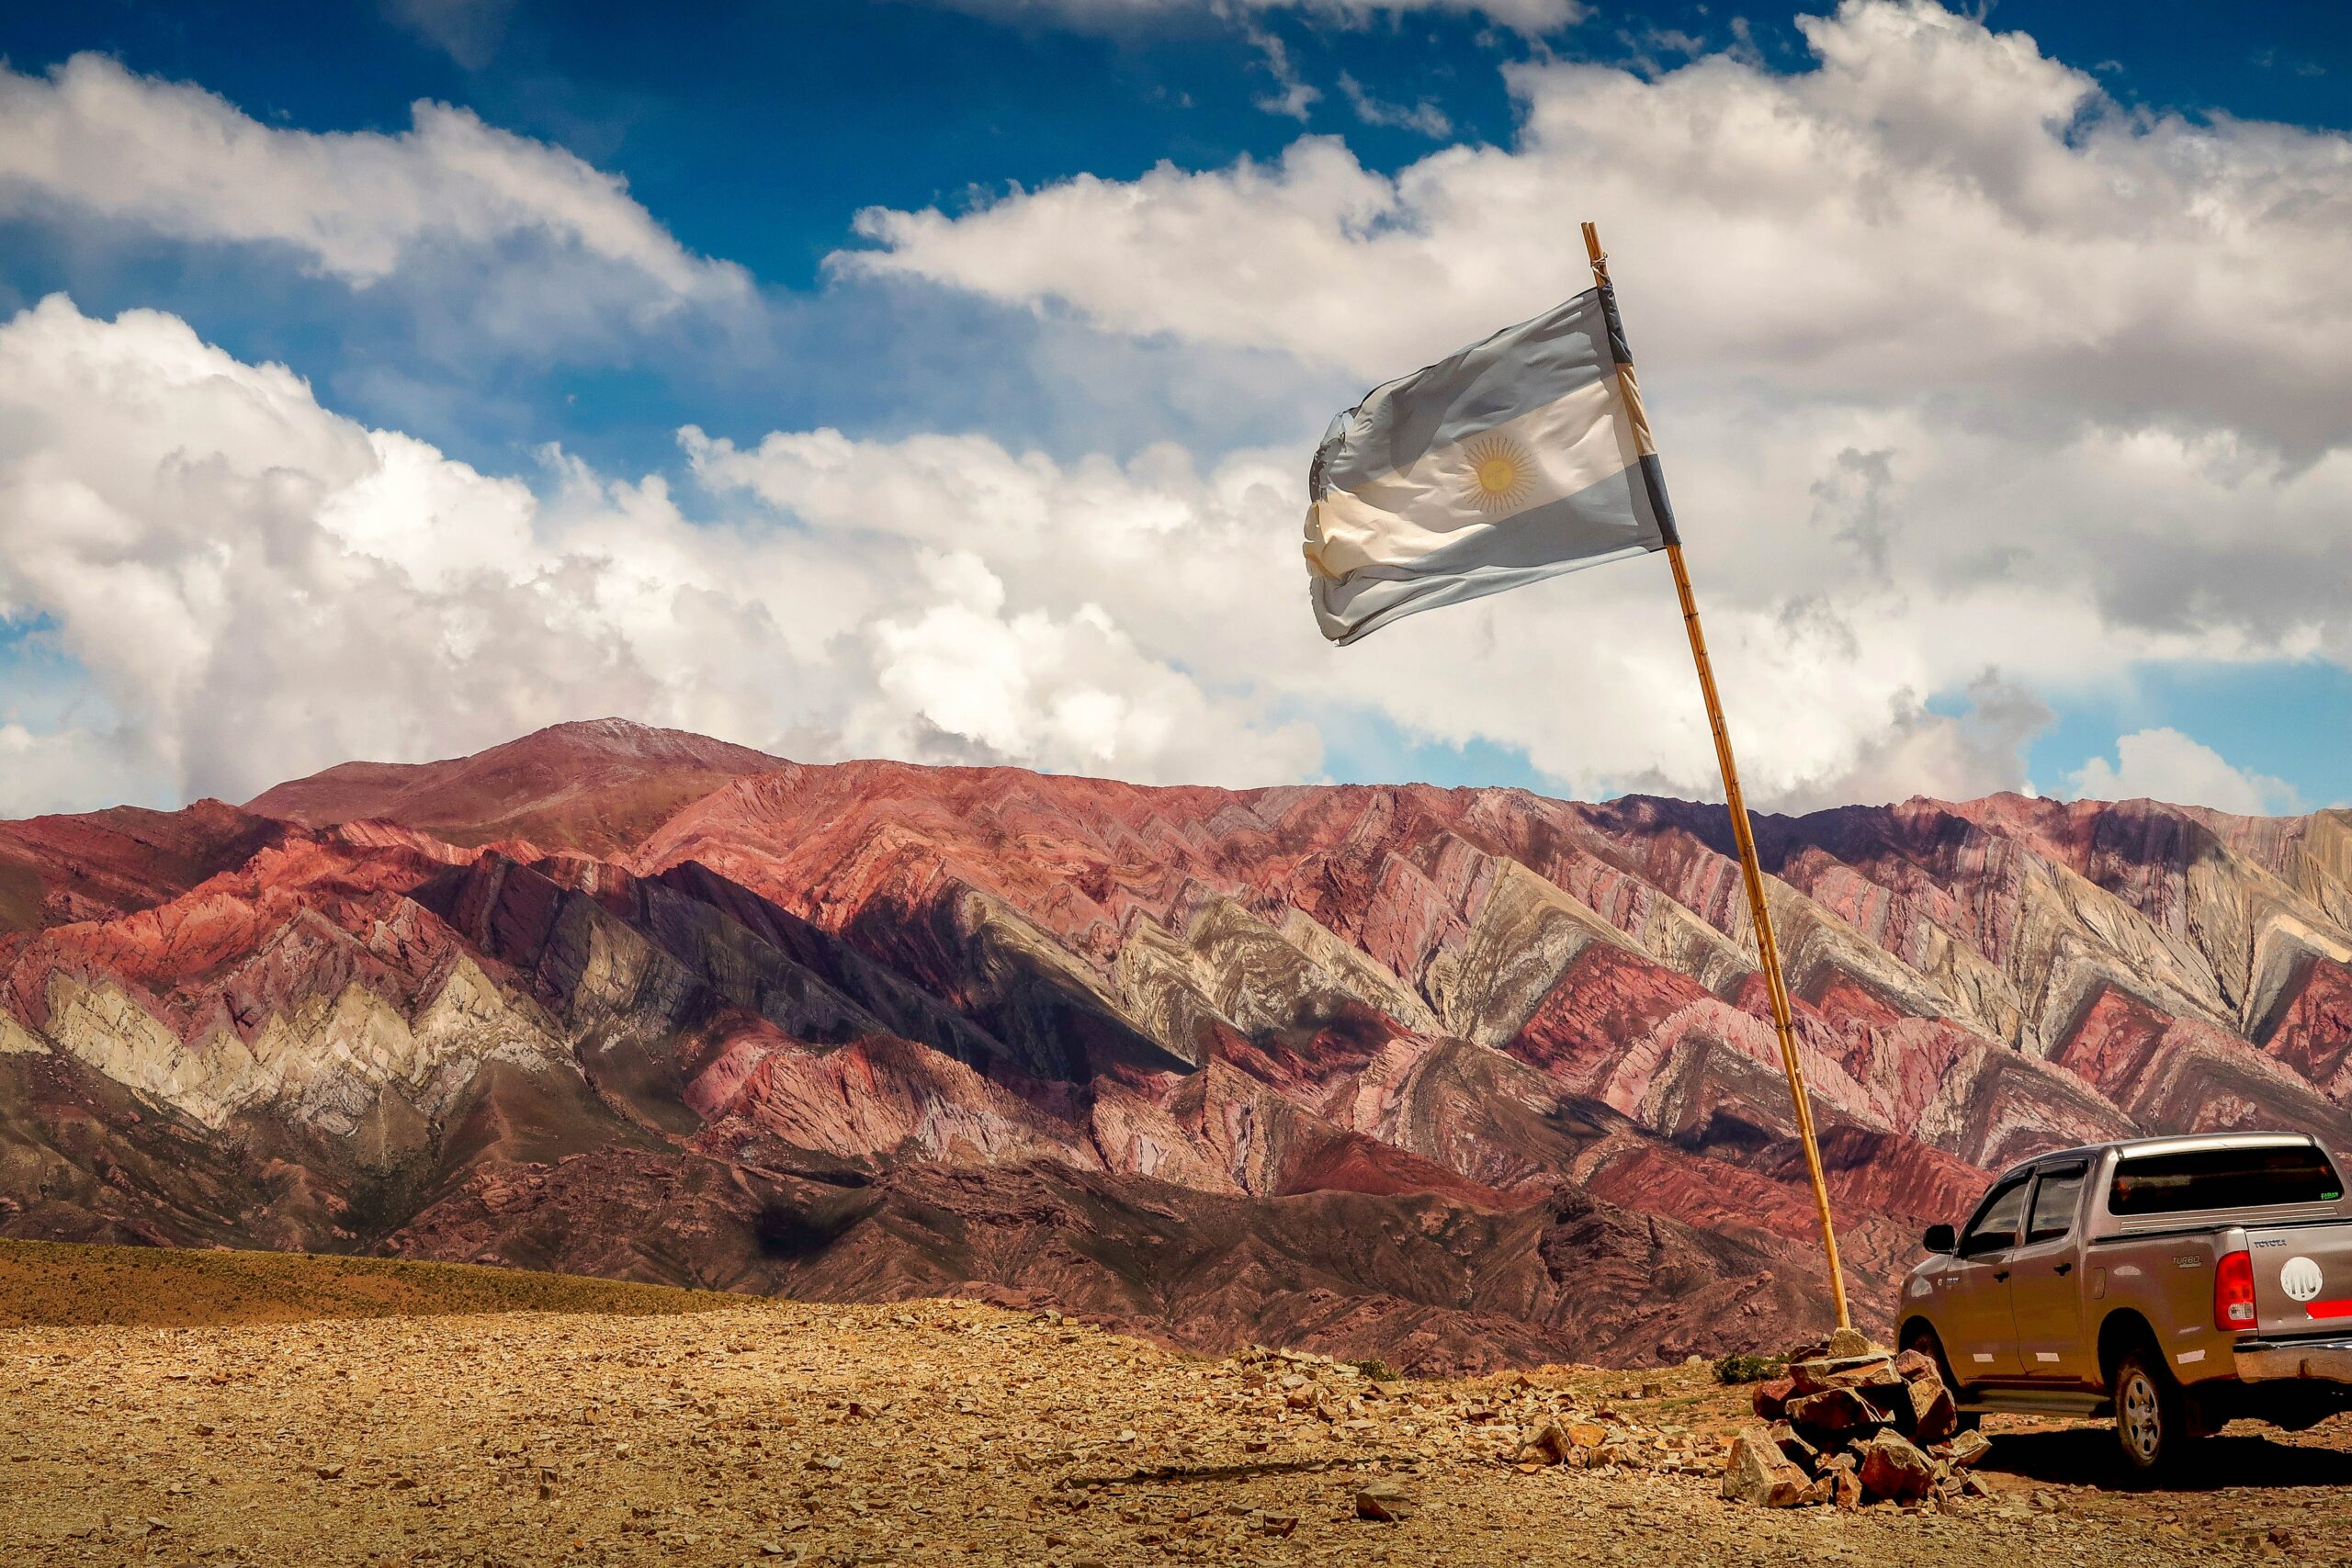 Brown rocky mountain under blue sky with Argentinian flag